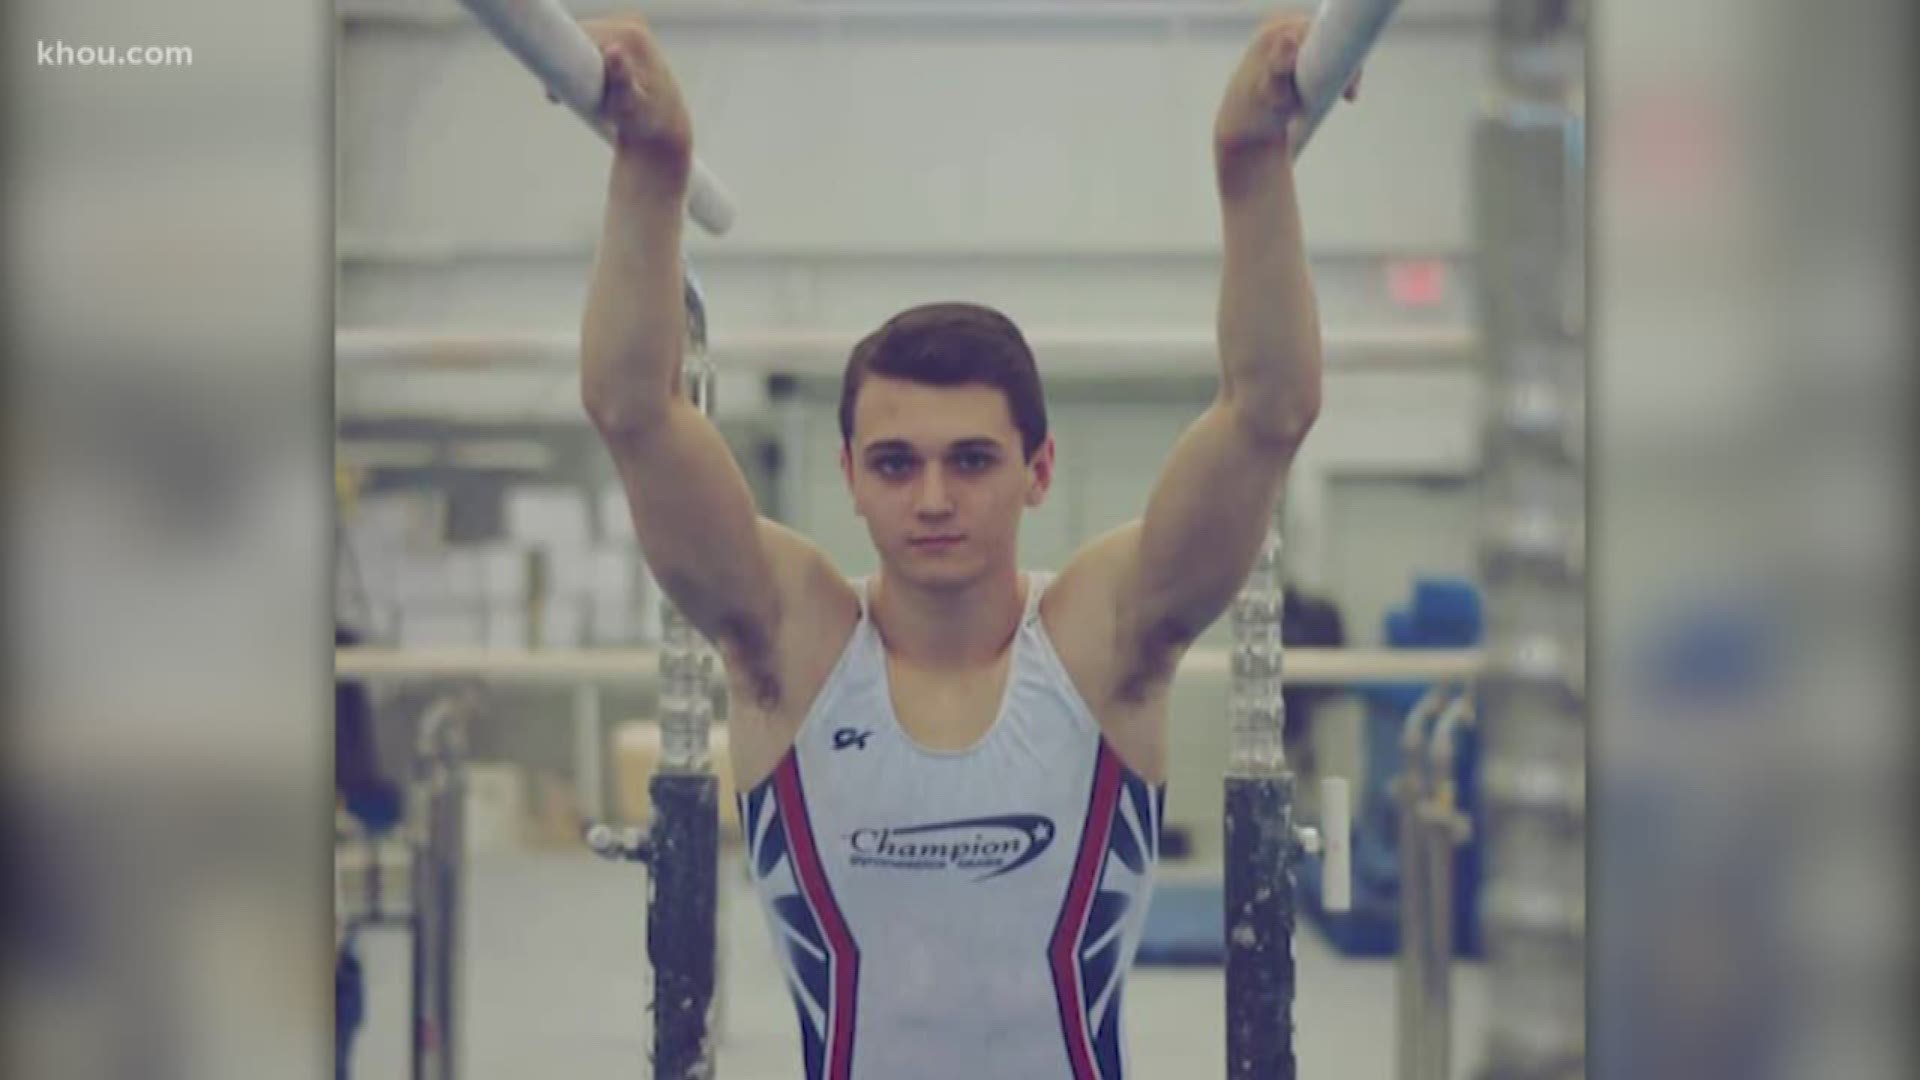 He was a decorated gymnast from Katy until a spinal cord injury changed everything. We found out his fight to recover is inspiring friends and family.